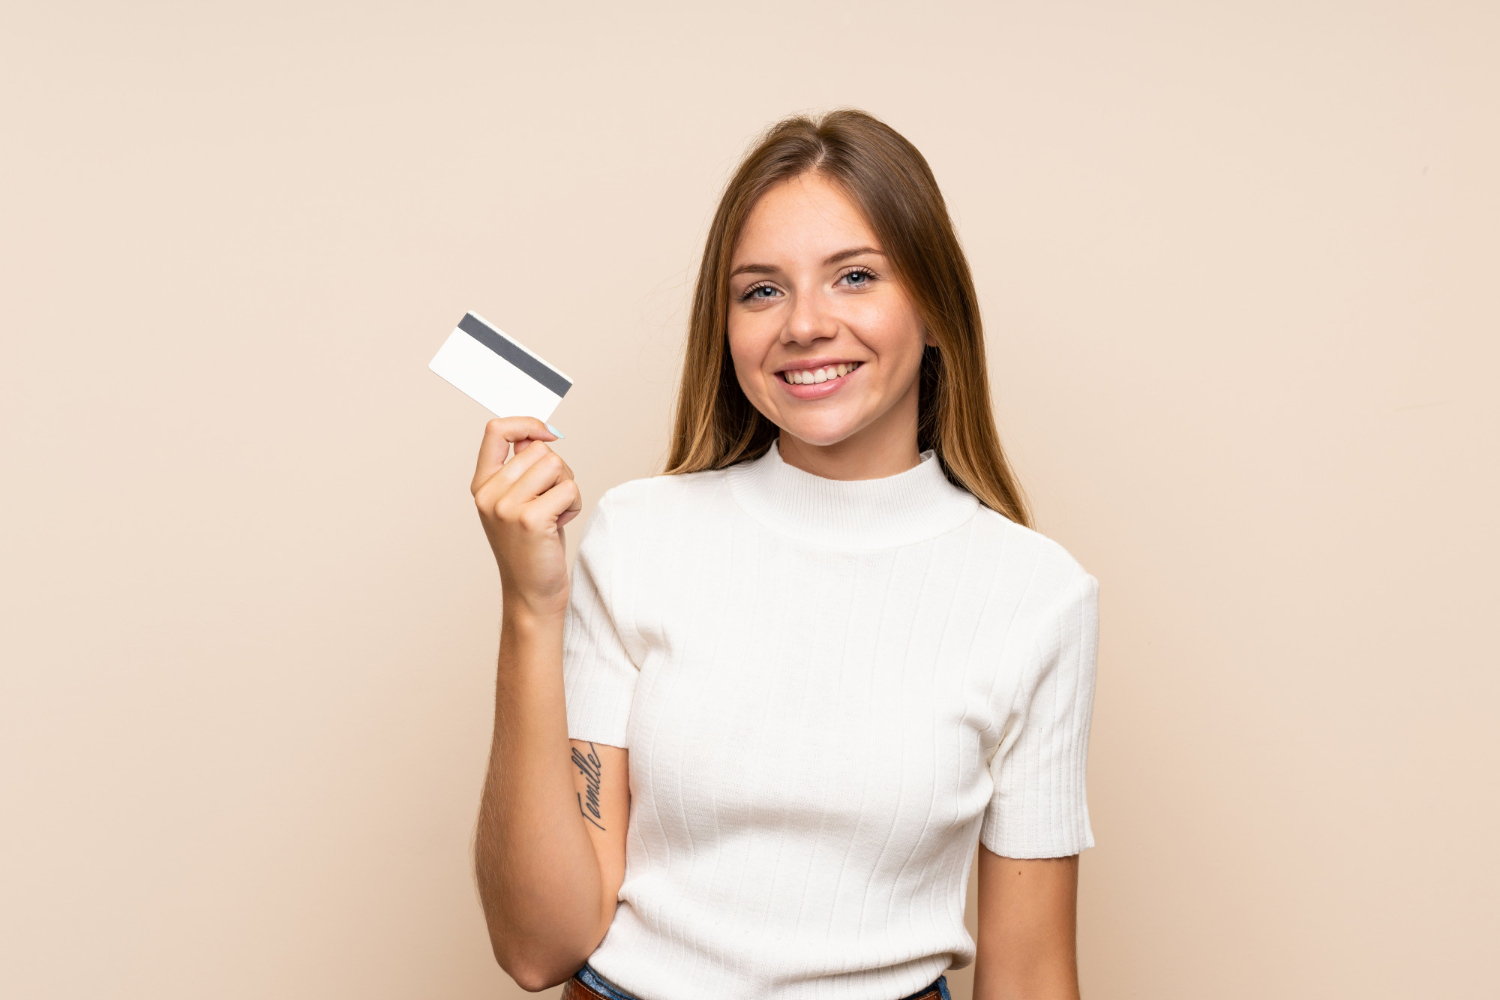 US Bank Cash Visa Signature Card: Check Benefits and Learn How to Apply for Yours